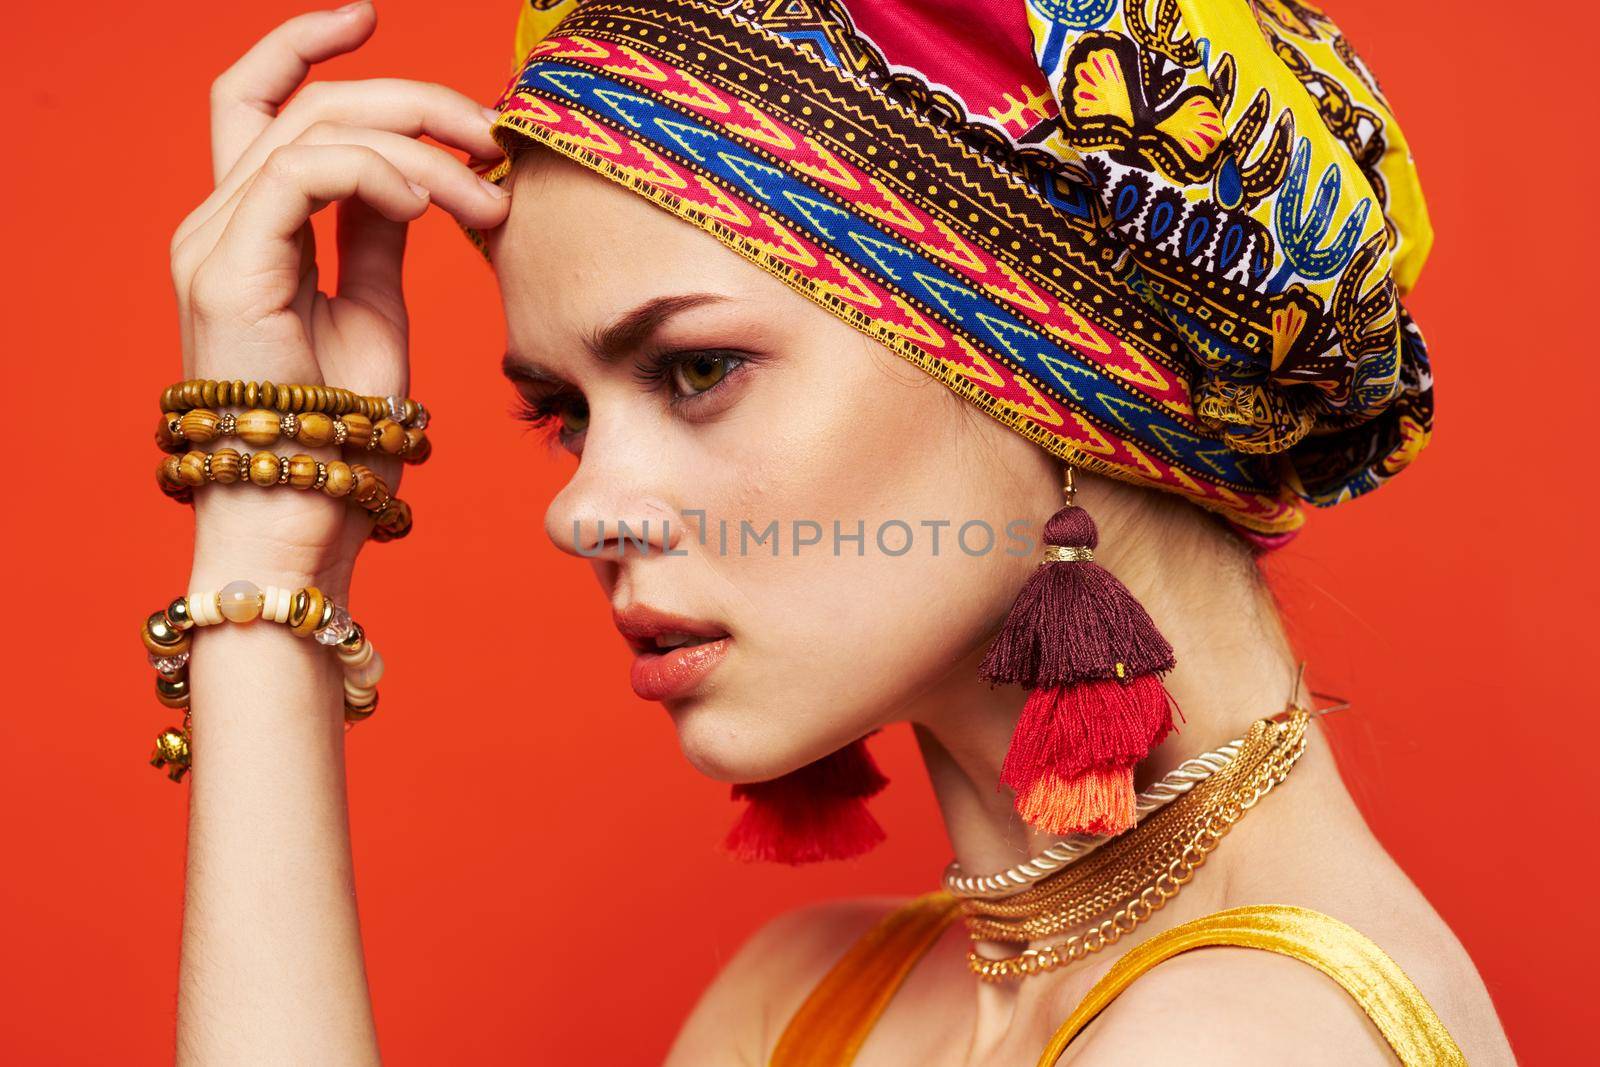 cheerful woman ethnicity multicolored headscarf makeup glamor red background. High quality photo